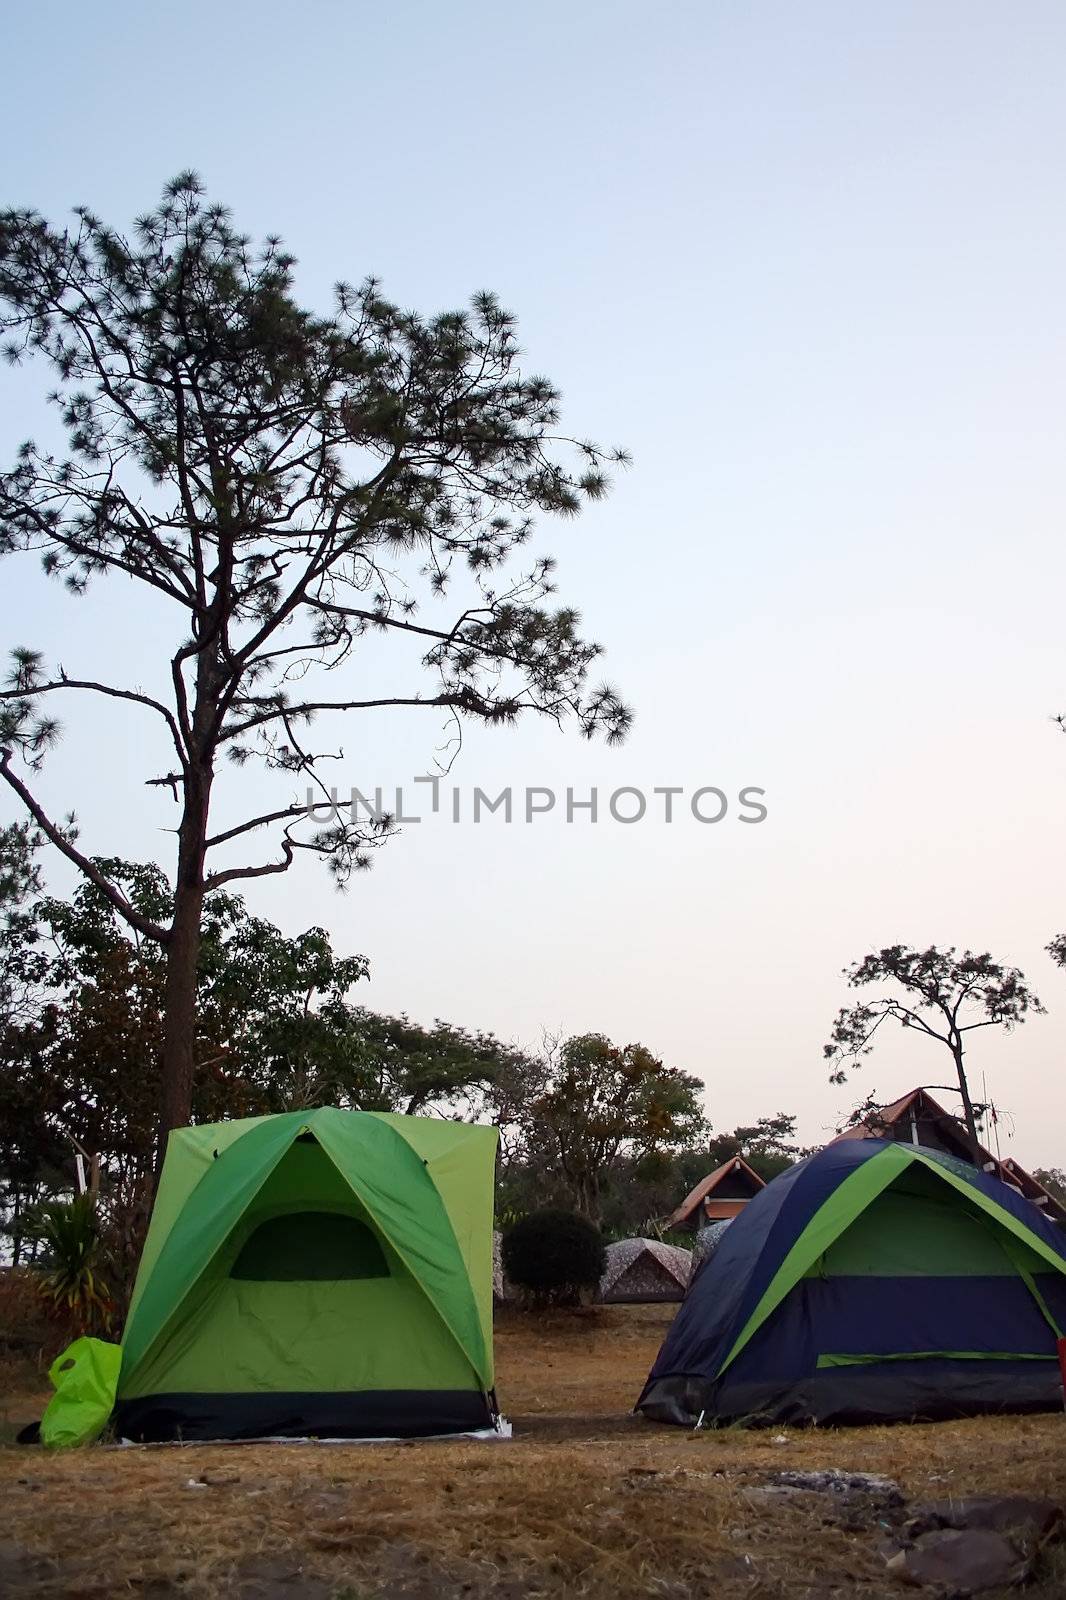 Campsite in the forest with many tents